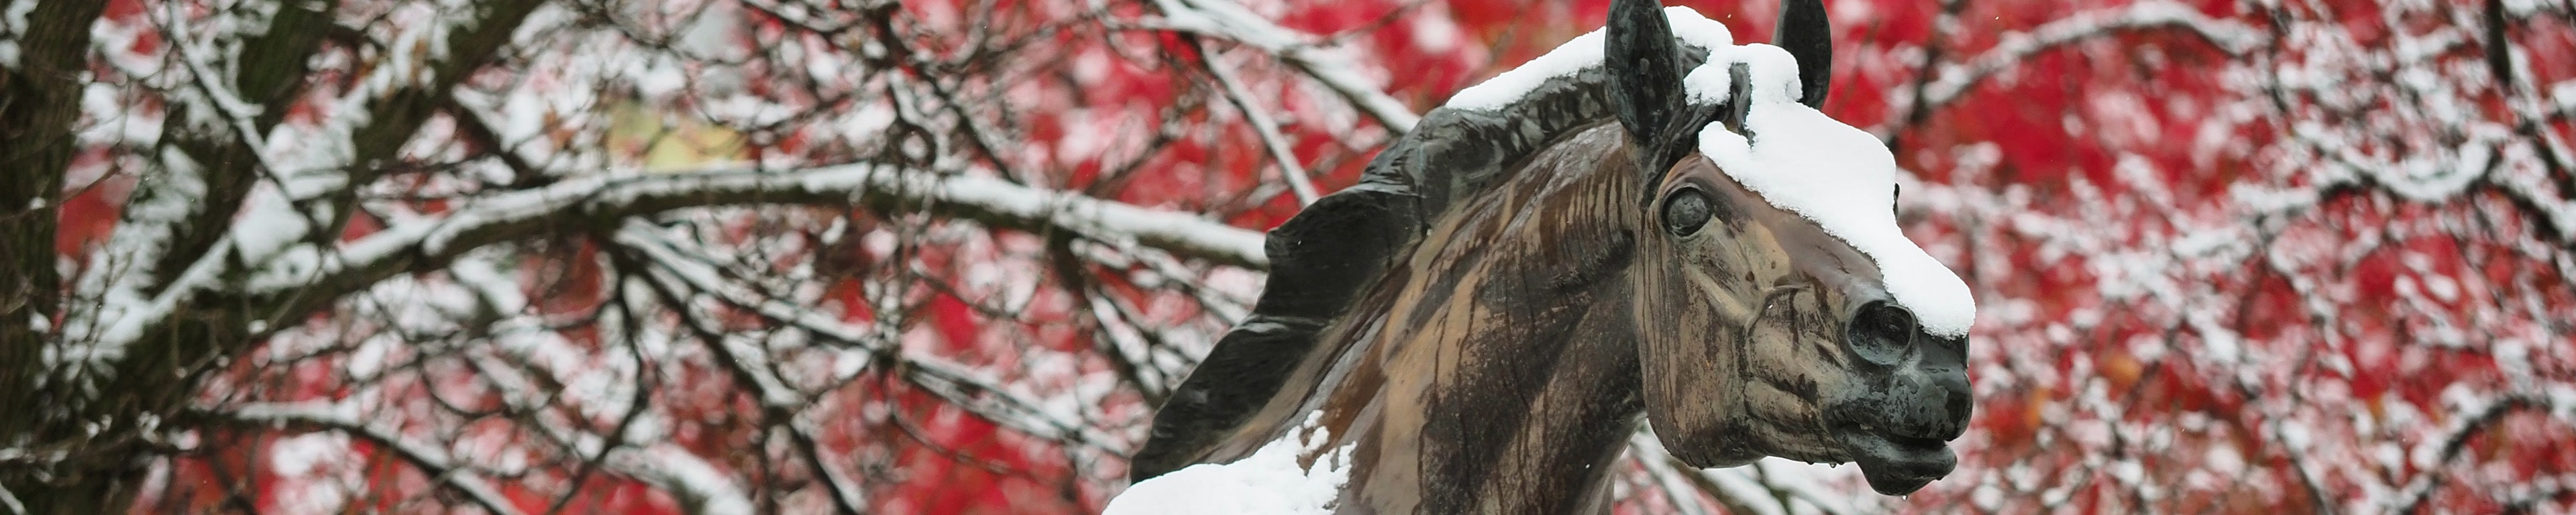 Snowfall on the WMU Bronco statue at the start of winter.